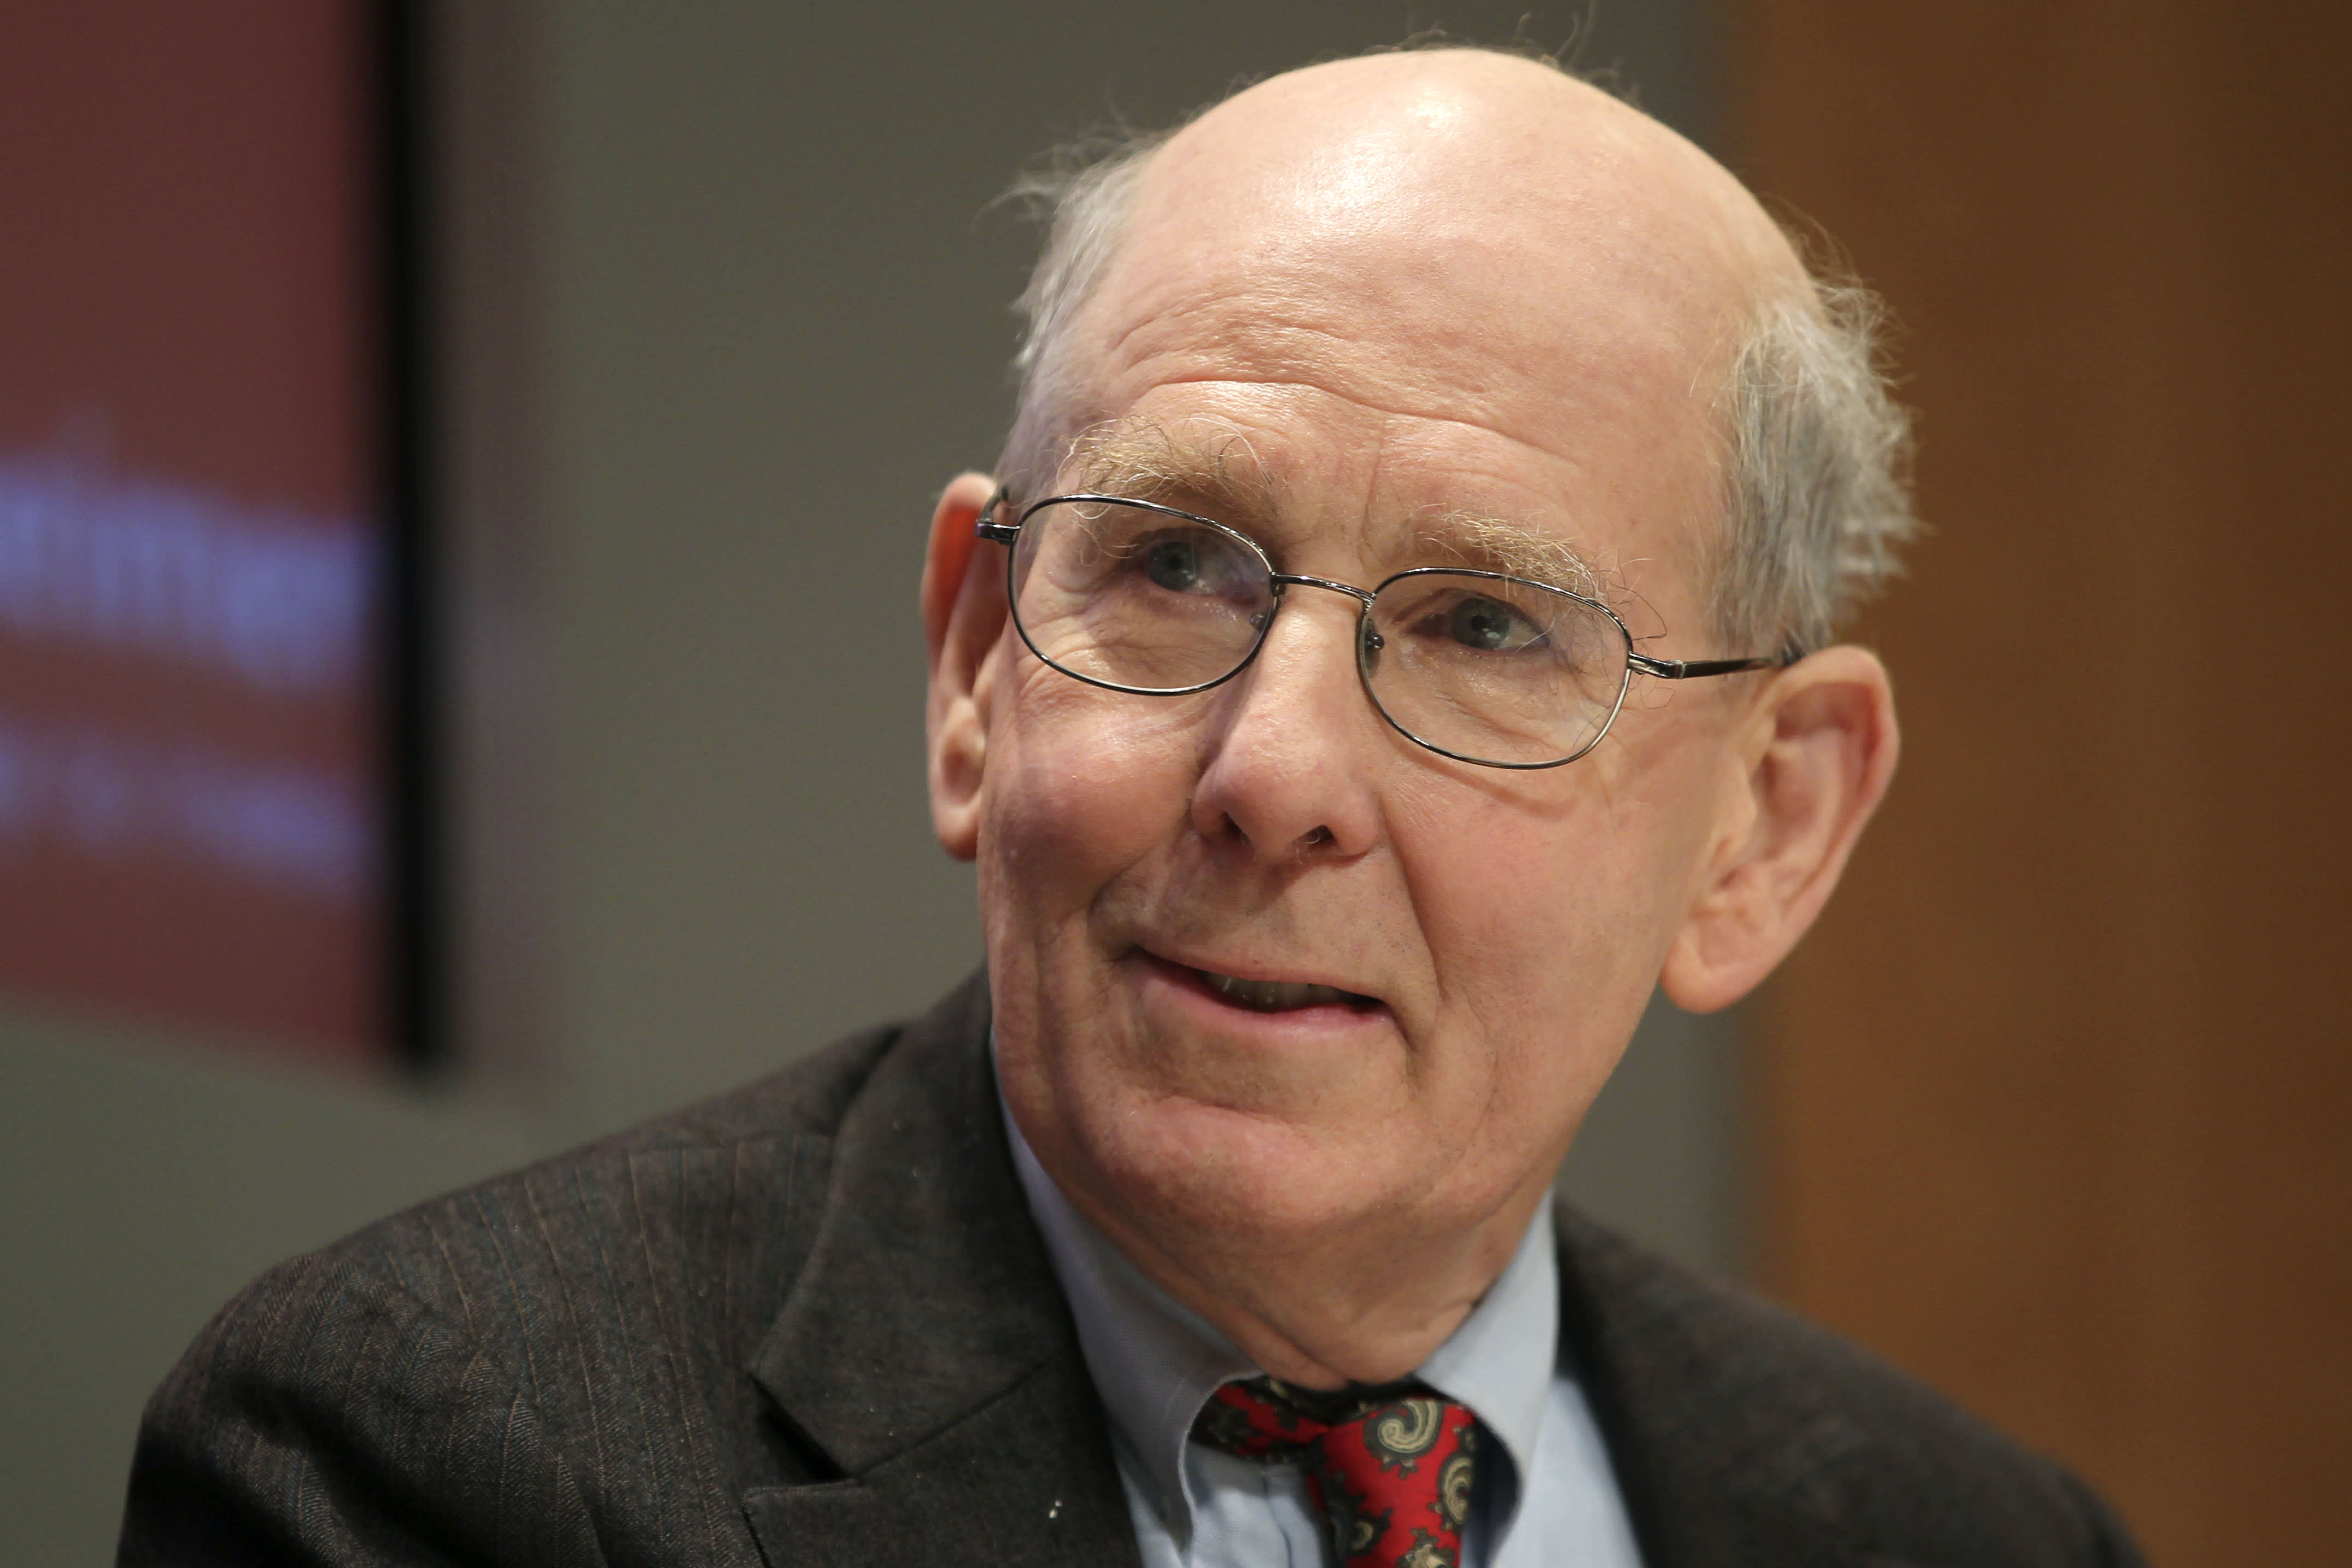 Gary Shilling warns that the U.S. economy is still at risk of recession